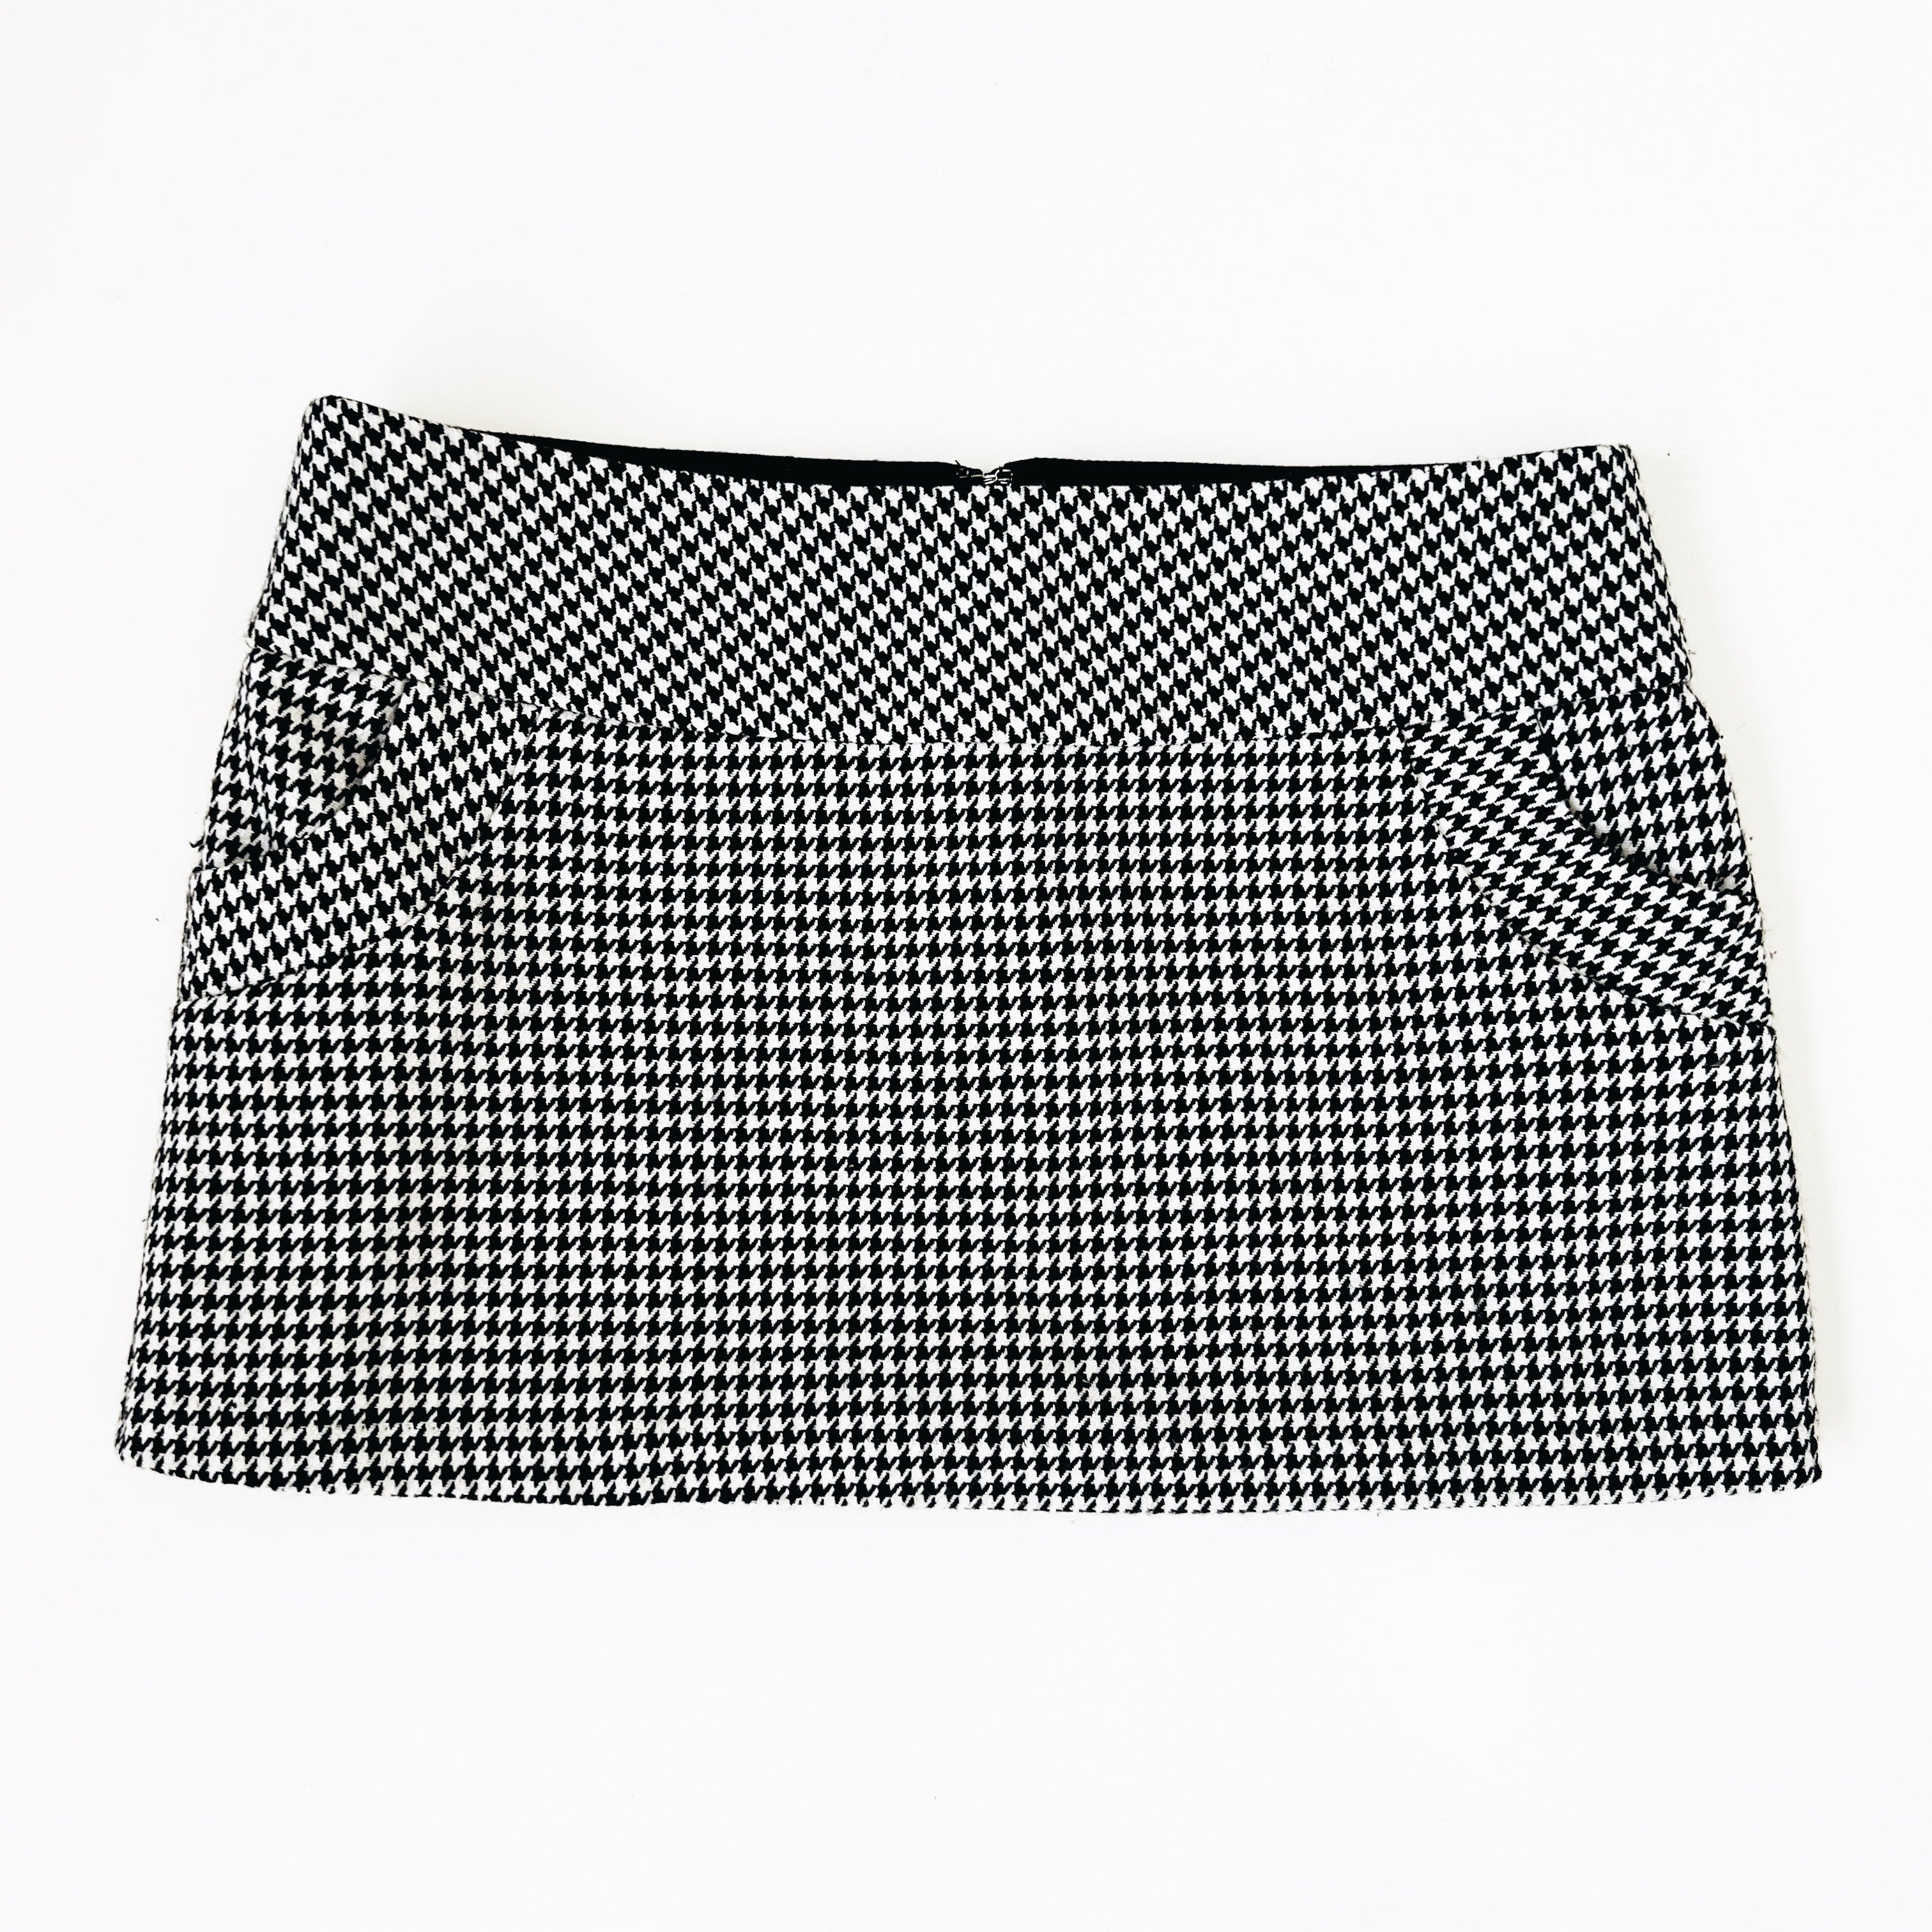 Early 2000s Houndstooth Mini Skirt (M)